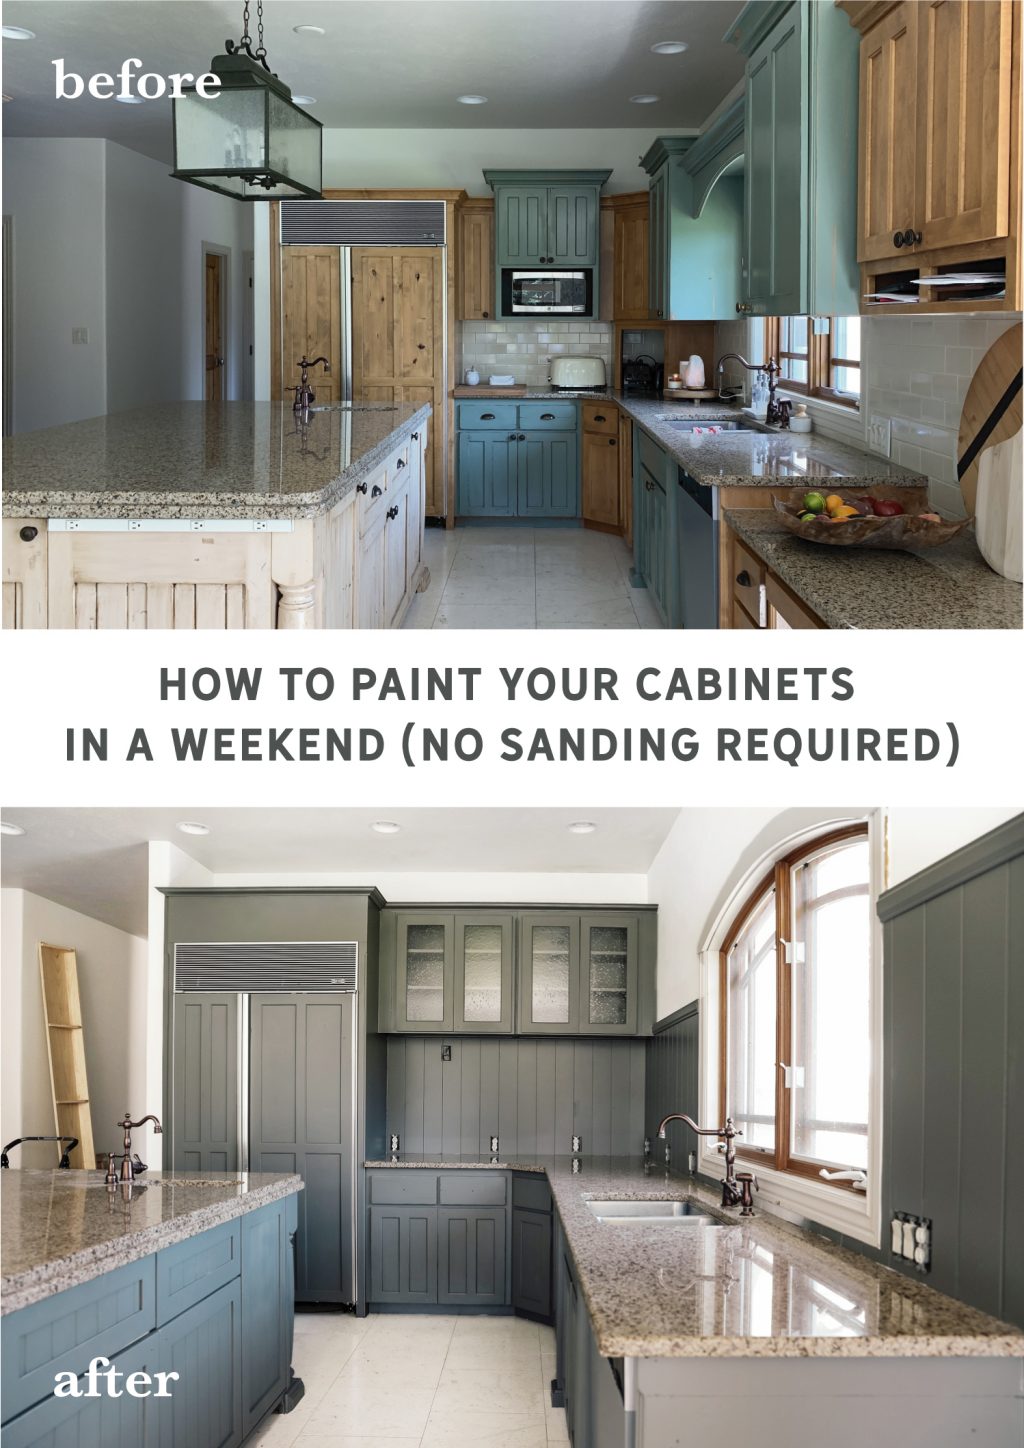 How To Paint Your Cabinets In A Weekend, Can You Paint Your Existing Kitchen Cabinets